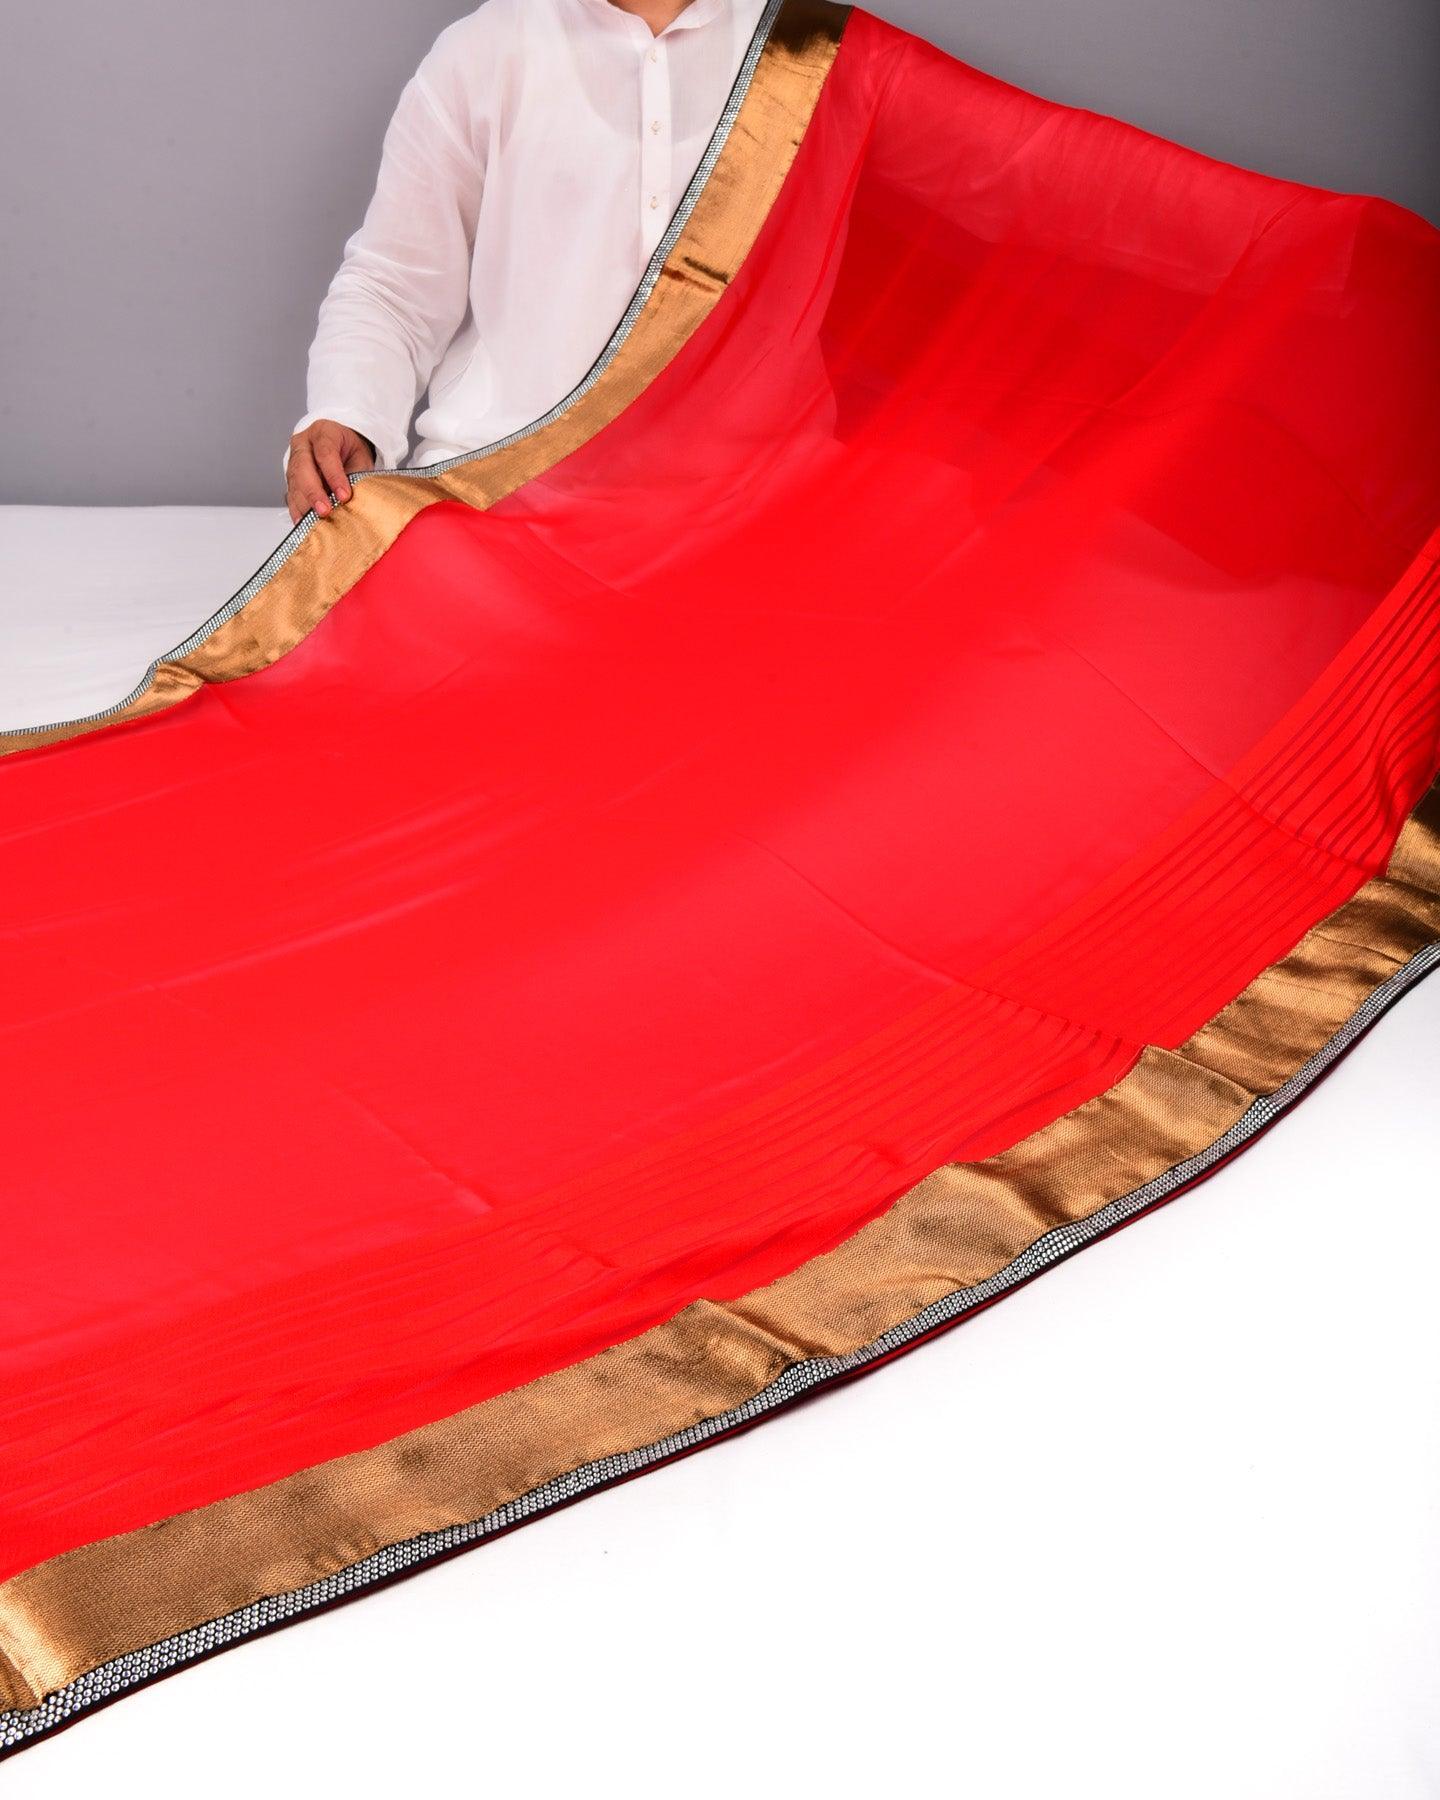 Red Hand-embroidered Georgette Saree - By HolyWeaves, Benares